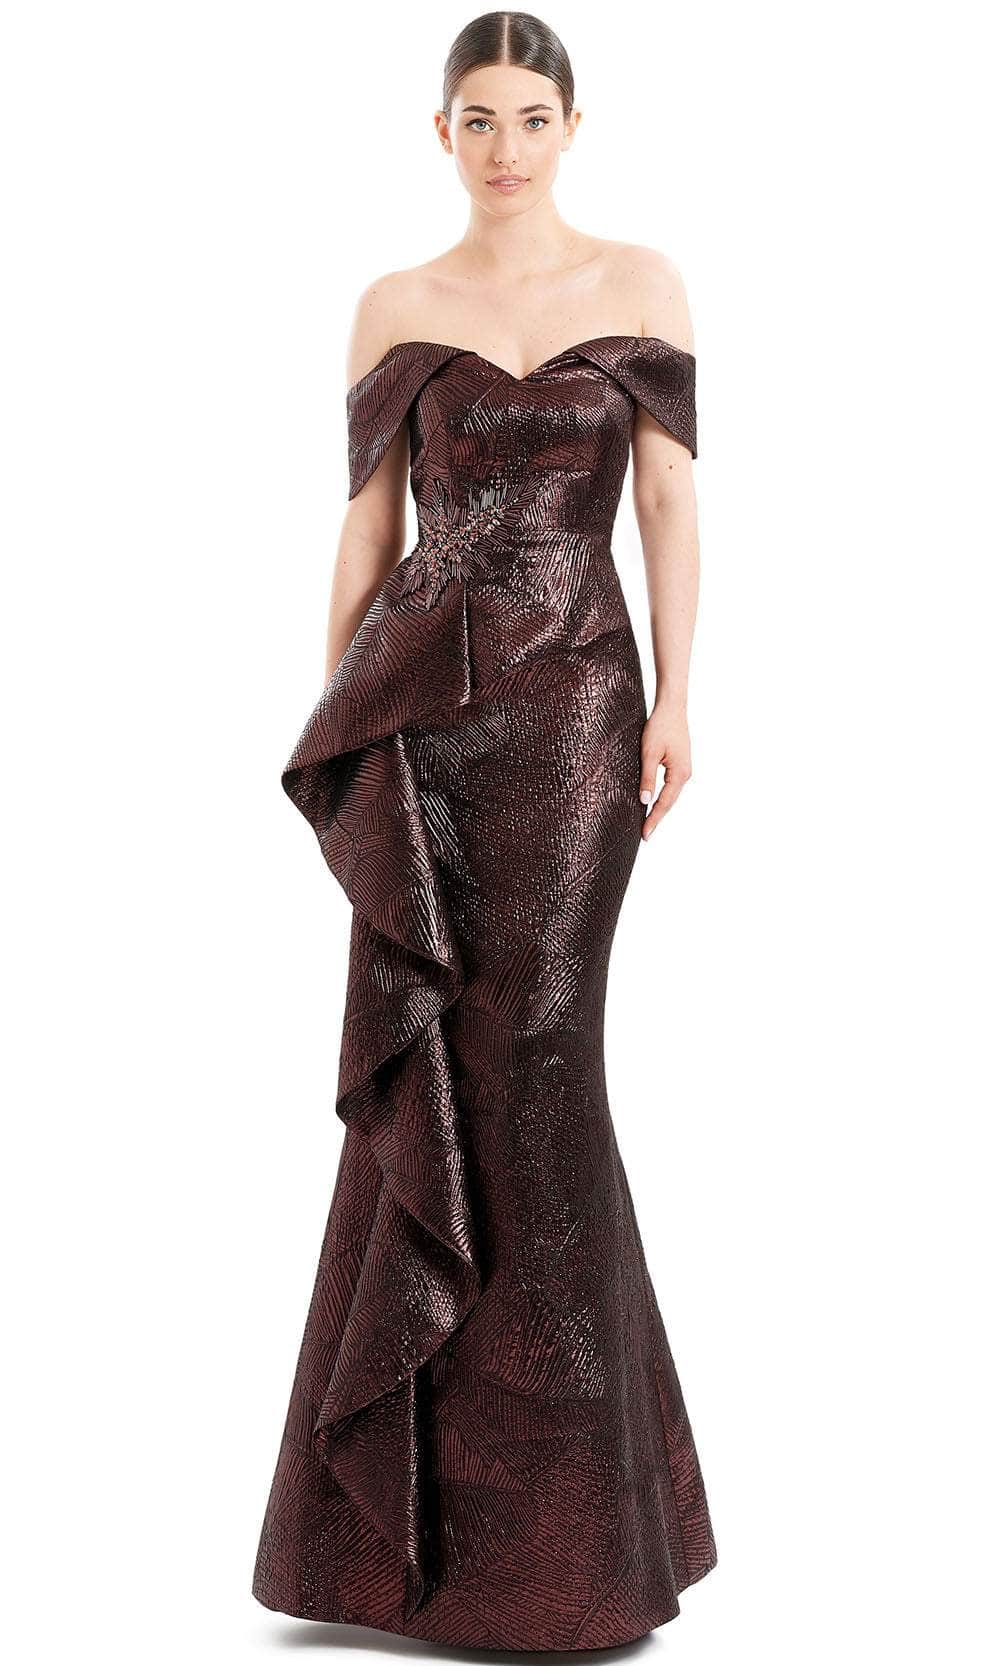 Alexander By Daymor 1653F22 - Sweetheart Ruffle Draped Evening Gown Special Occasion Dress 4 / Wine